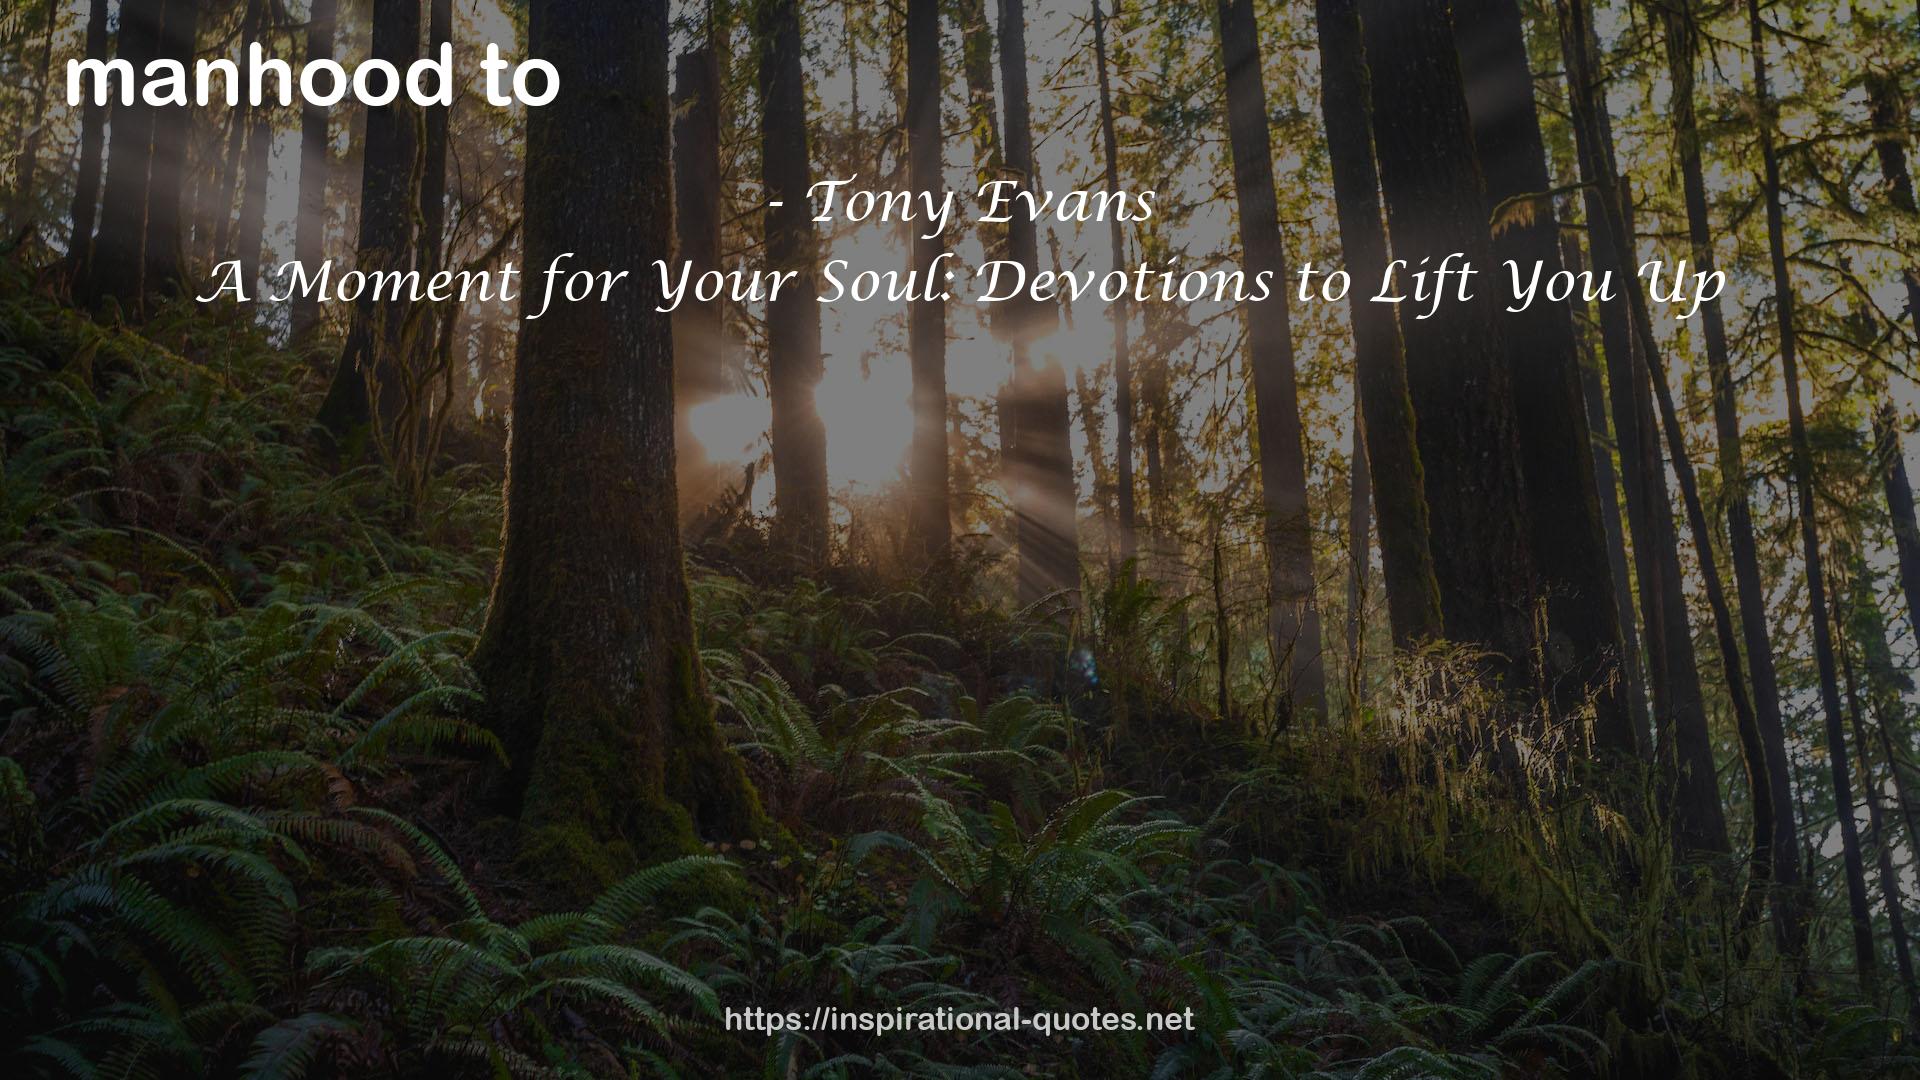 A Moment for Your Soul: Devotions to Lift You Up QUOTES